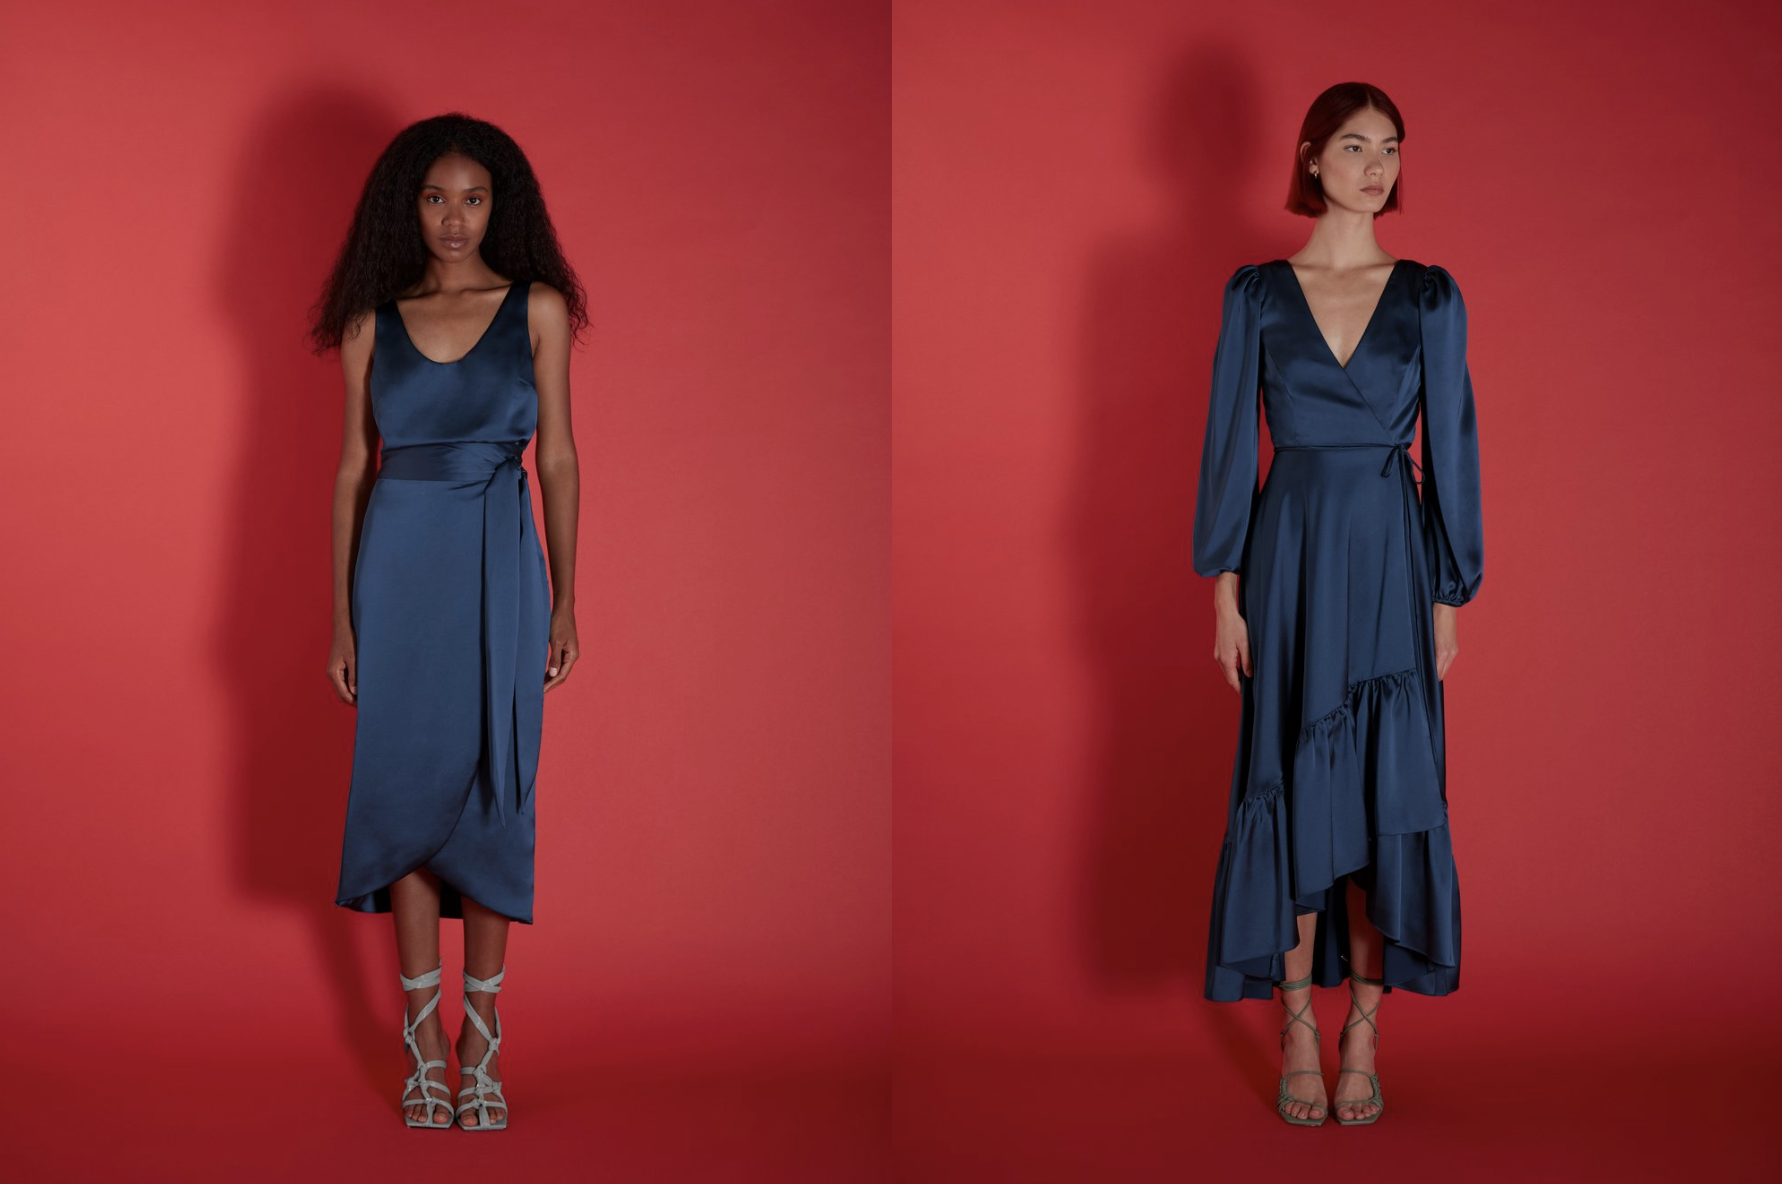 Halfpenny London Sister collection of bridesmaids dresses and separates in Navy blue